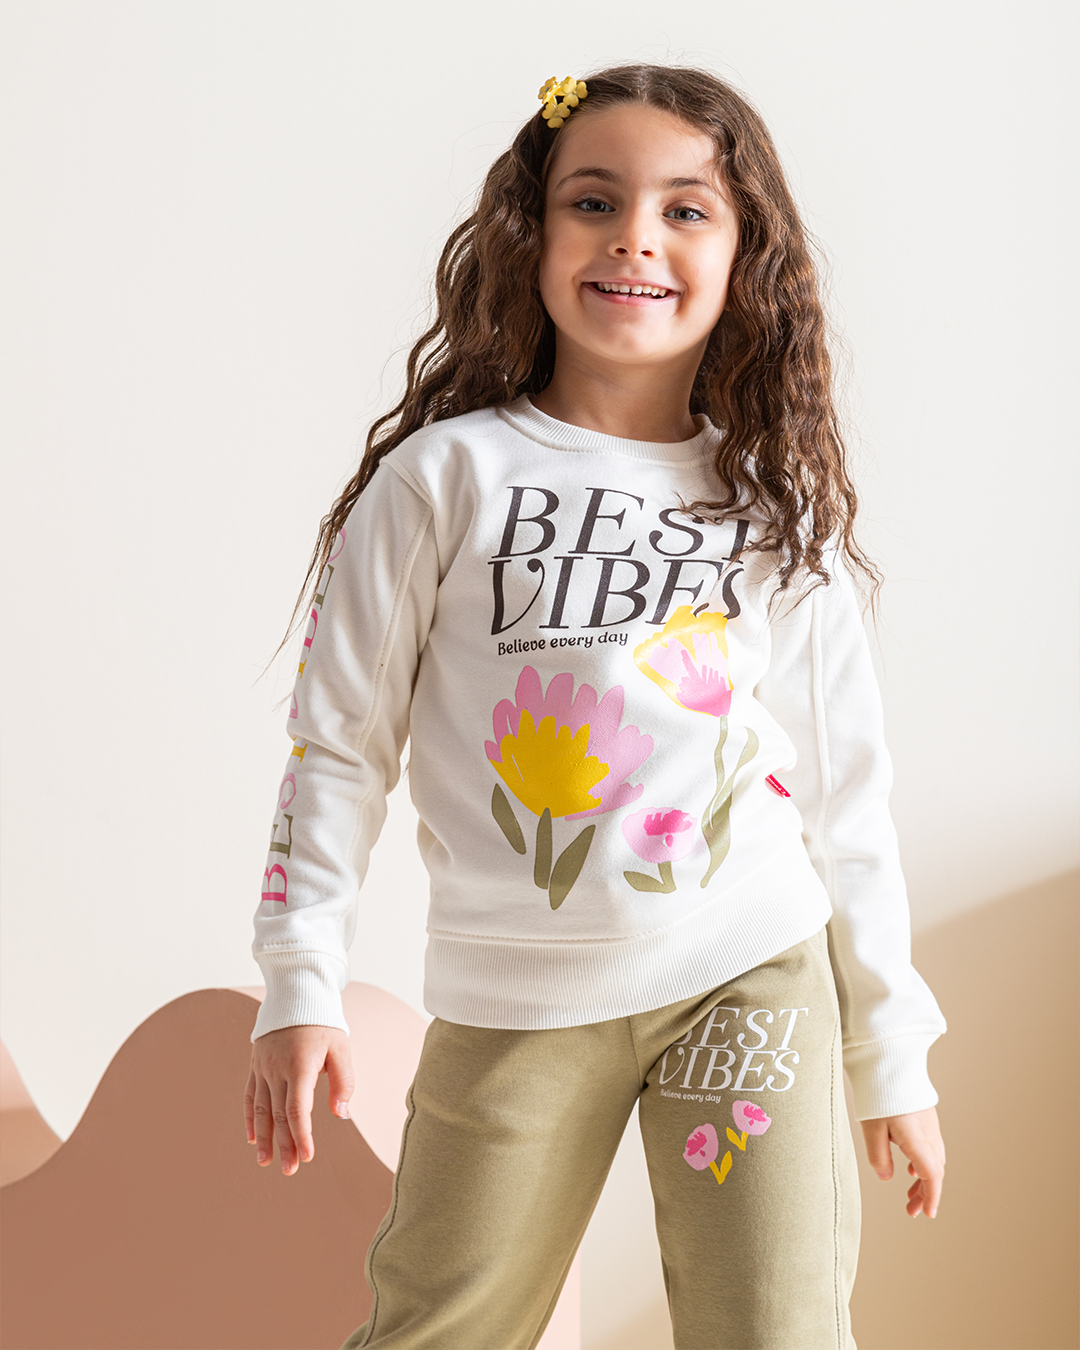 Best vibes Girls' pajamas, Rowand Milton, 2 printed cuts on the chest, cuffs and sleeves + printed trousers